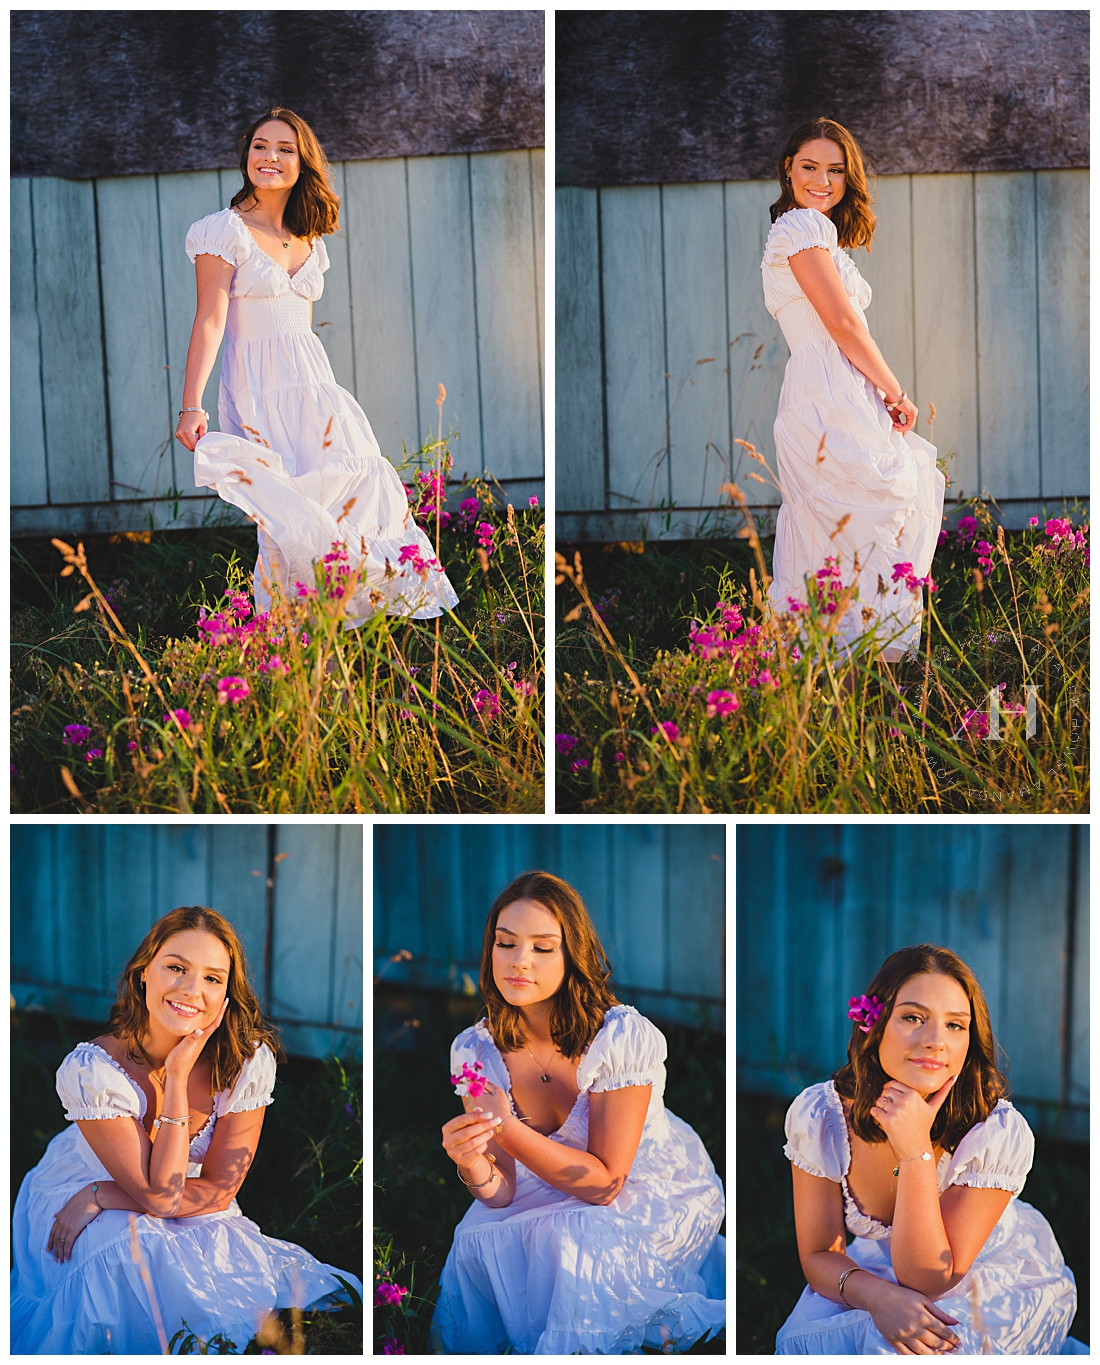 Senior Girl Twirling in White Dress | Pose Ideas for Outdoor Senior Portraits, Cute Outfit Ideas | Amanda Howse Photography | The Best Tacoma Senior Photographer